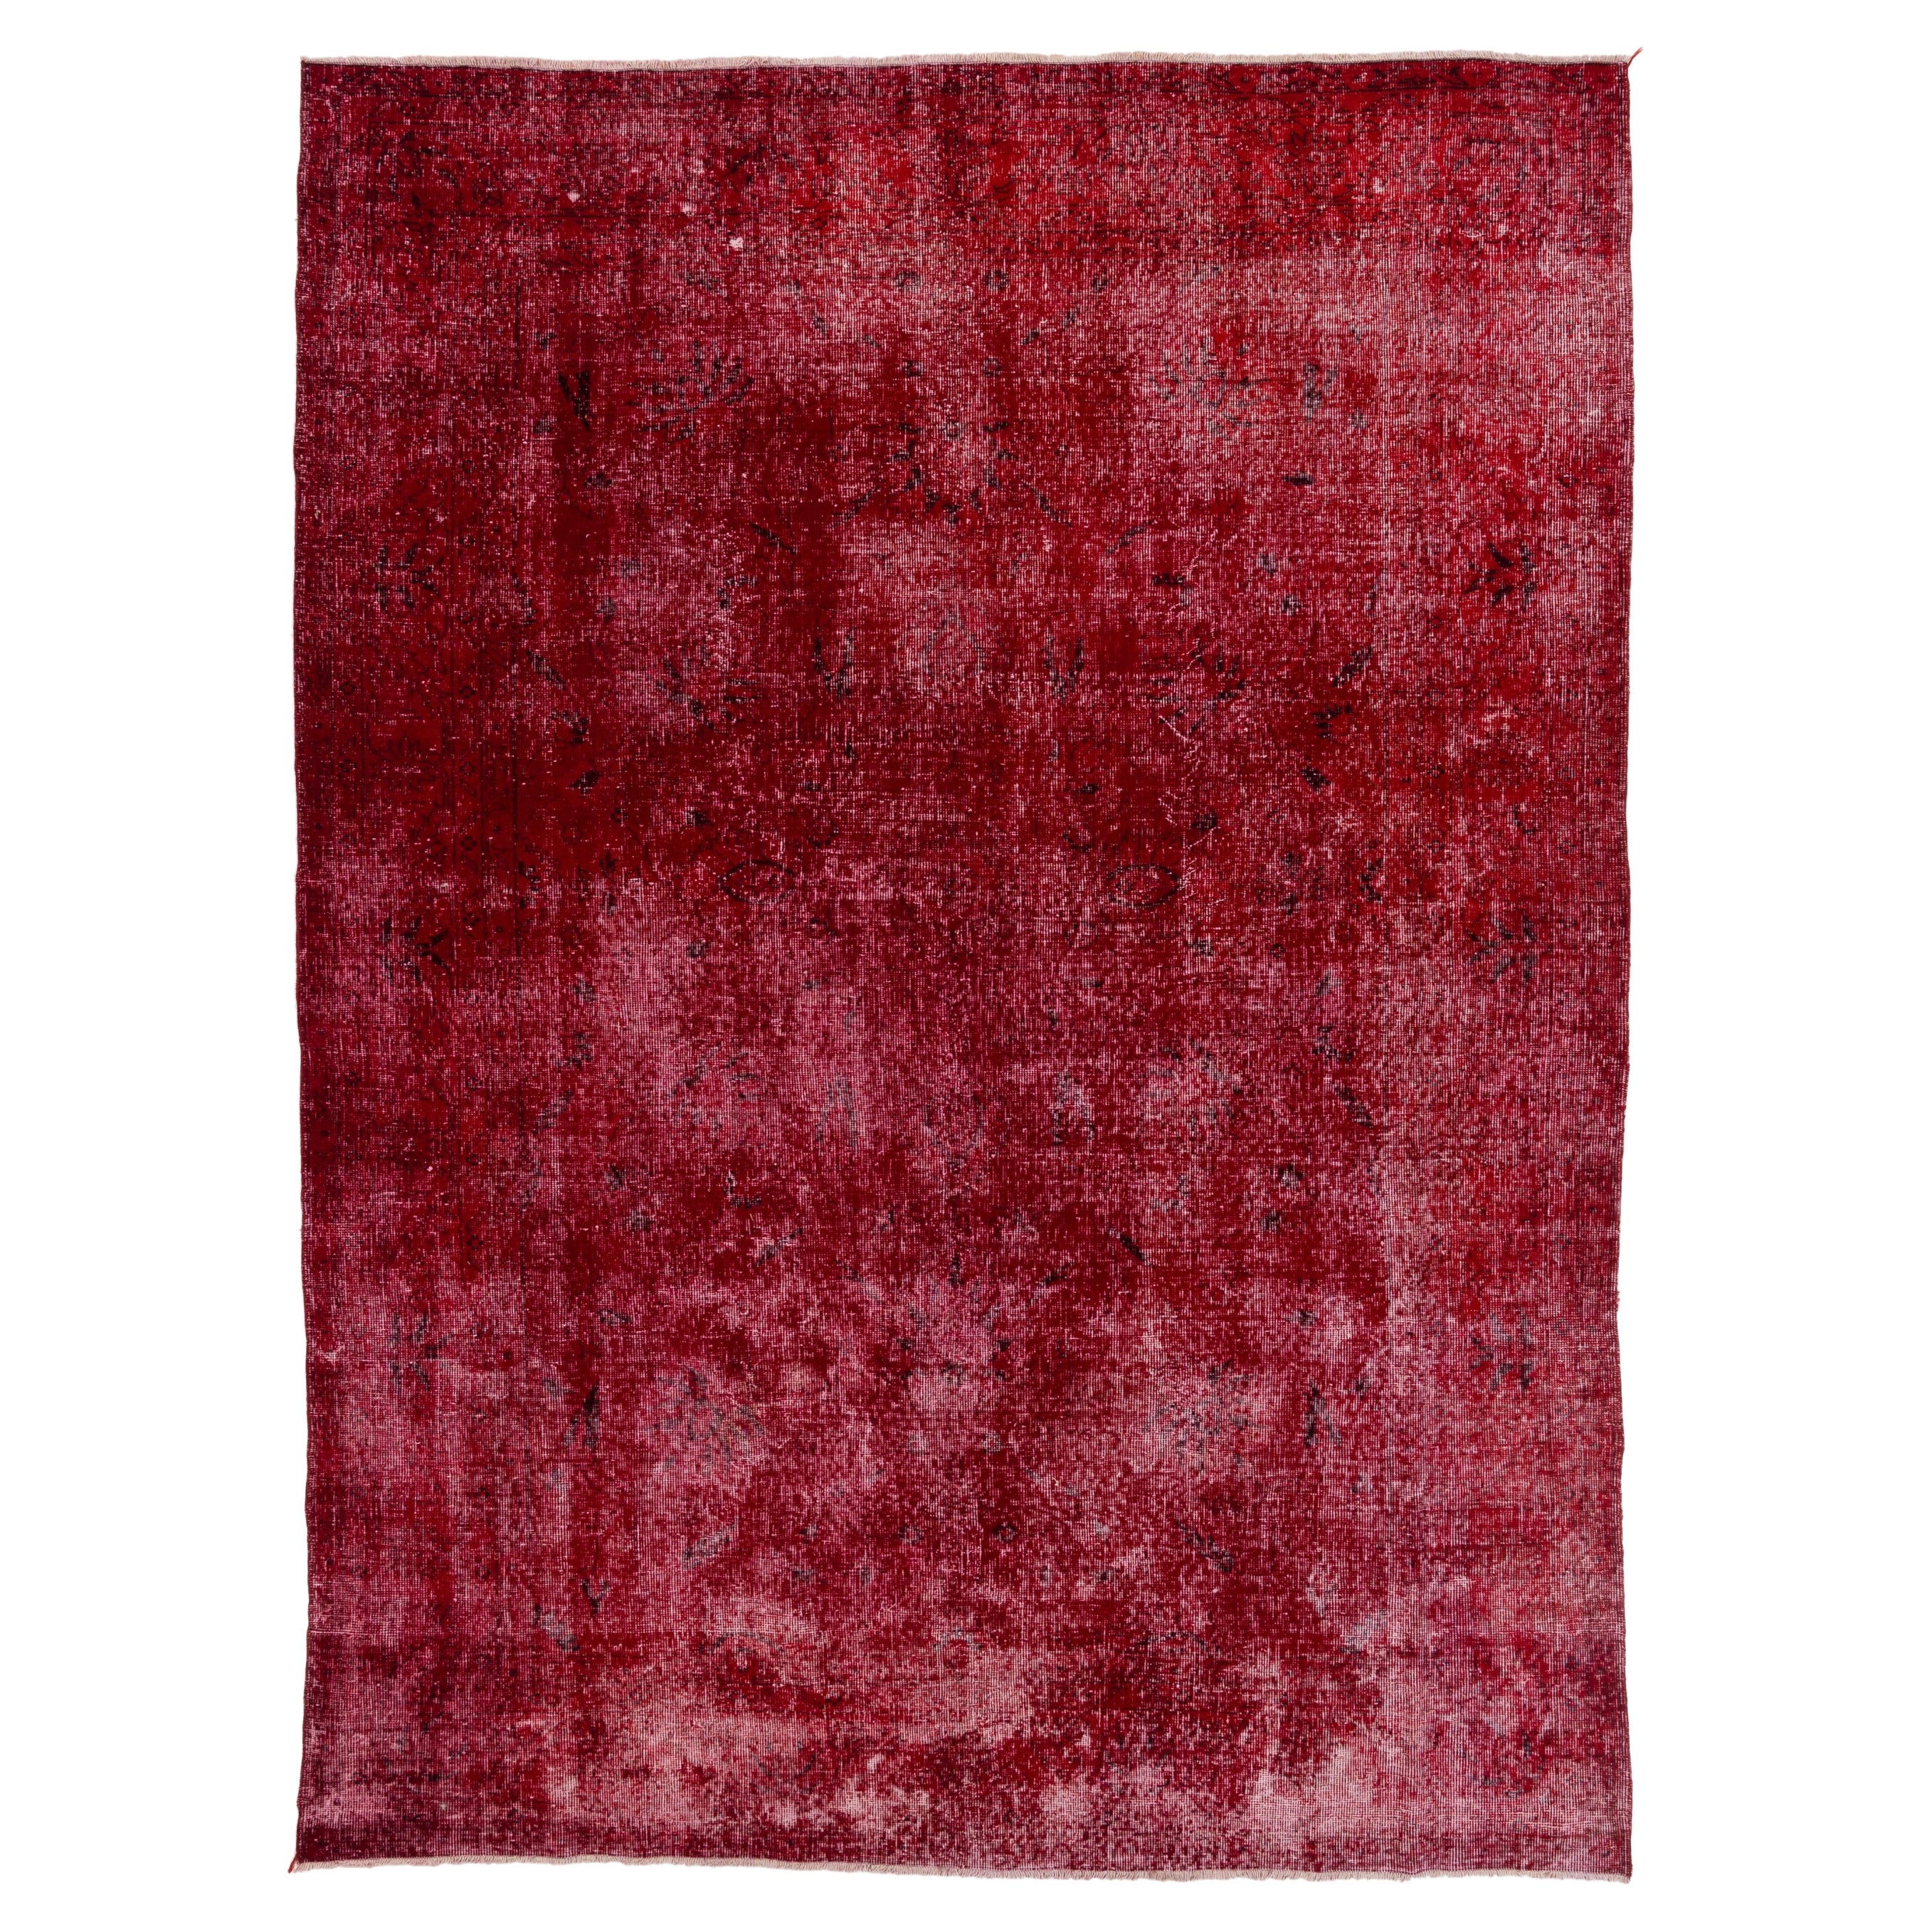 7.4x10 Ft Distressed Handmade Turkish Area Rug in Red 4 Modern Home and Office For Sale